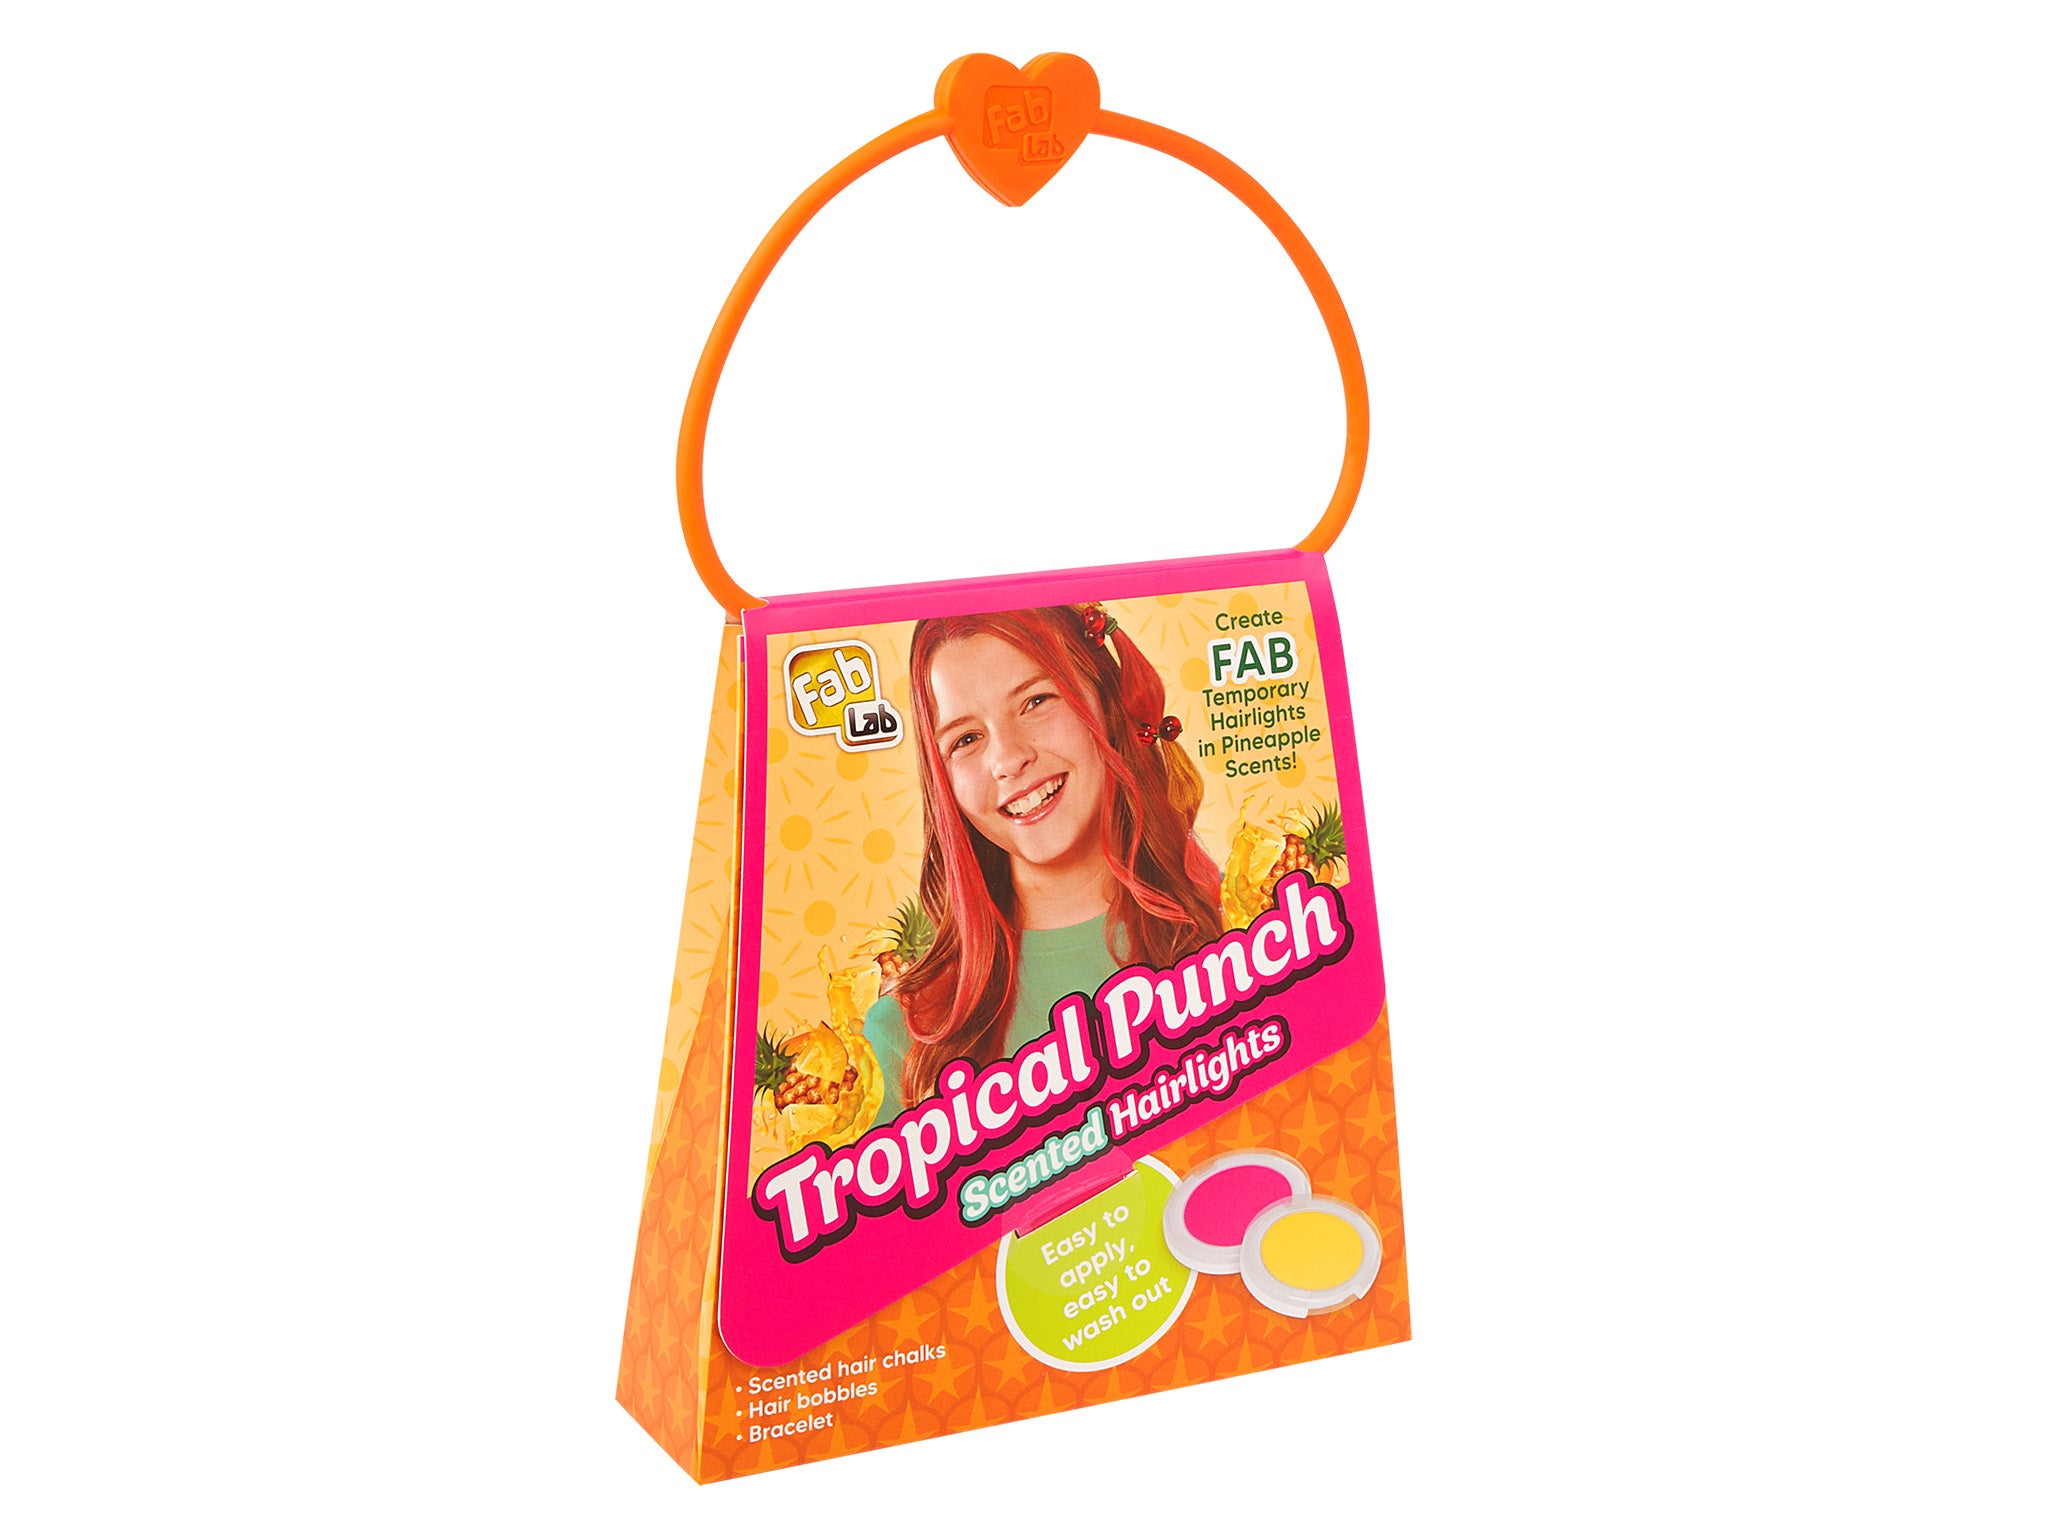 FabLab tropical punch scented highlights